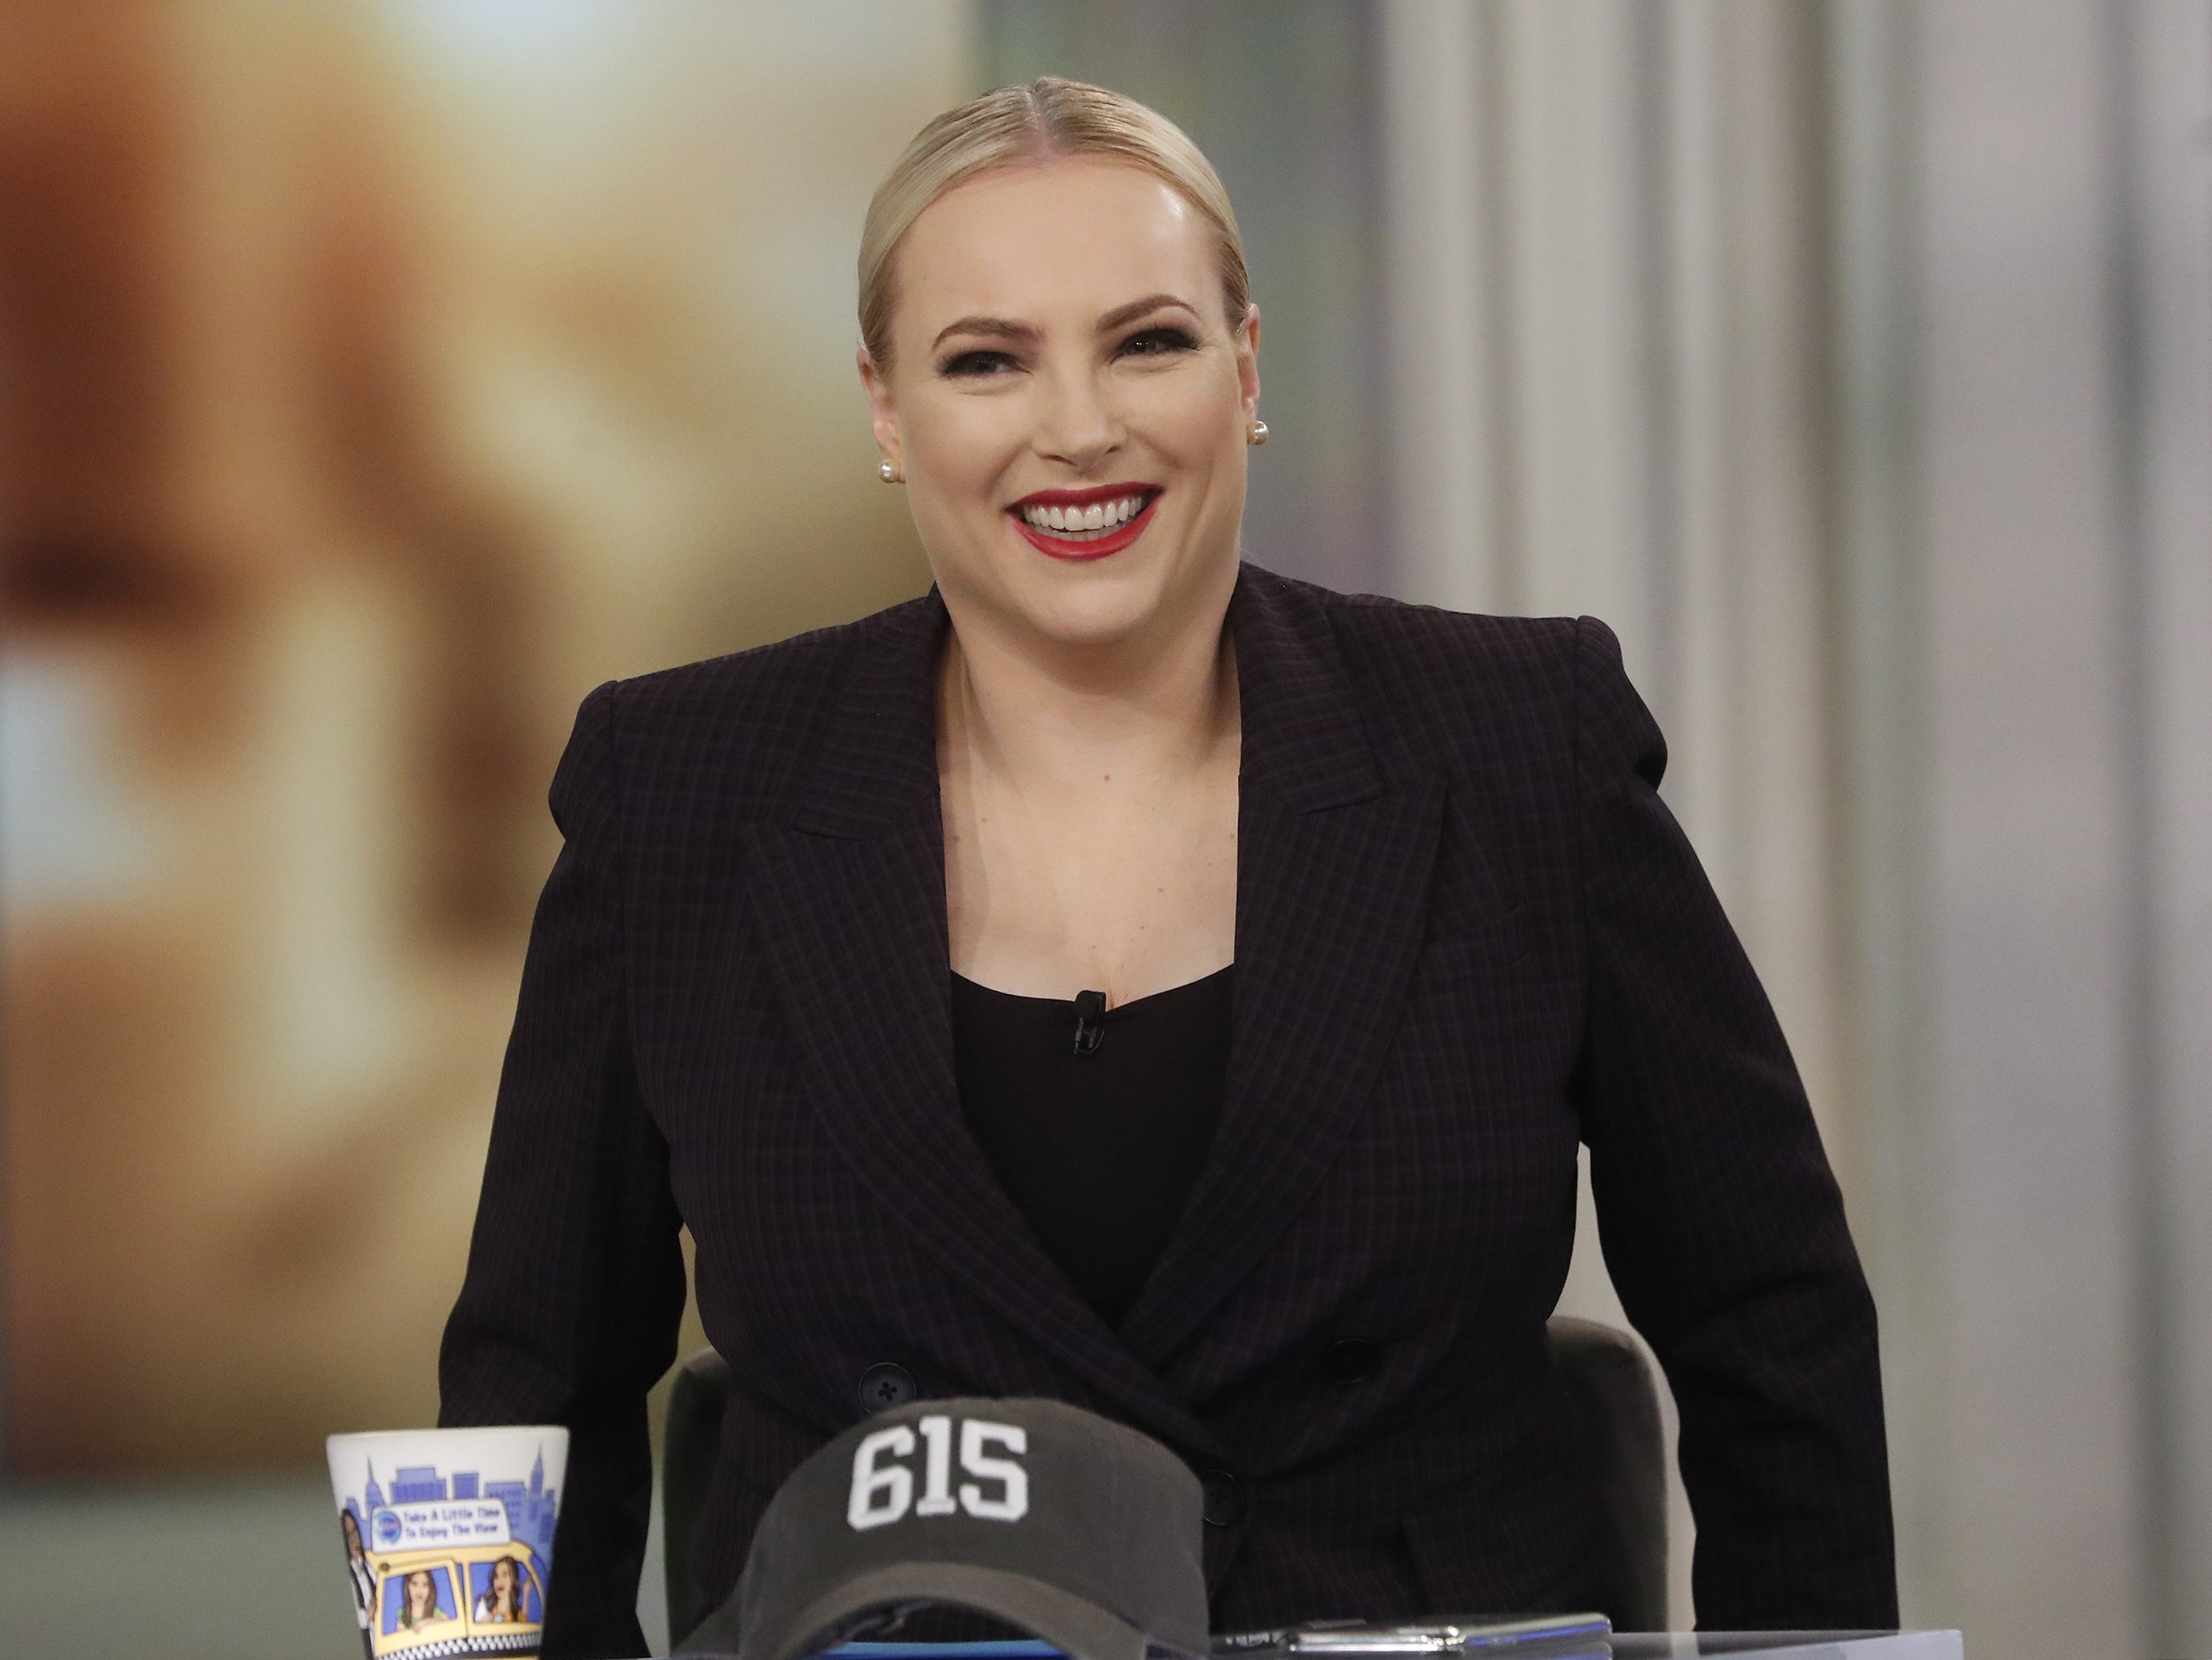 Meghan McCain appears on an episode of "The View" on Wednesday, March 11, 2020. | Source: Getty Images.